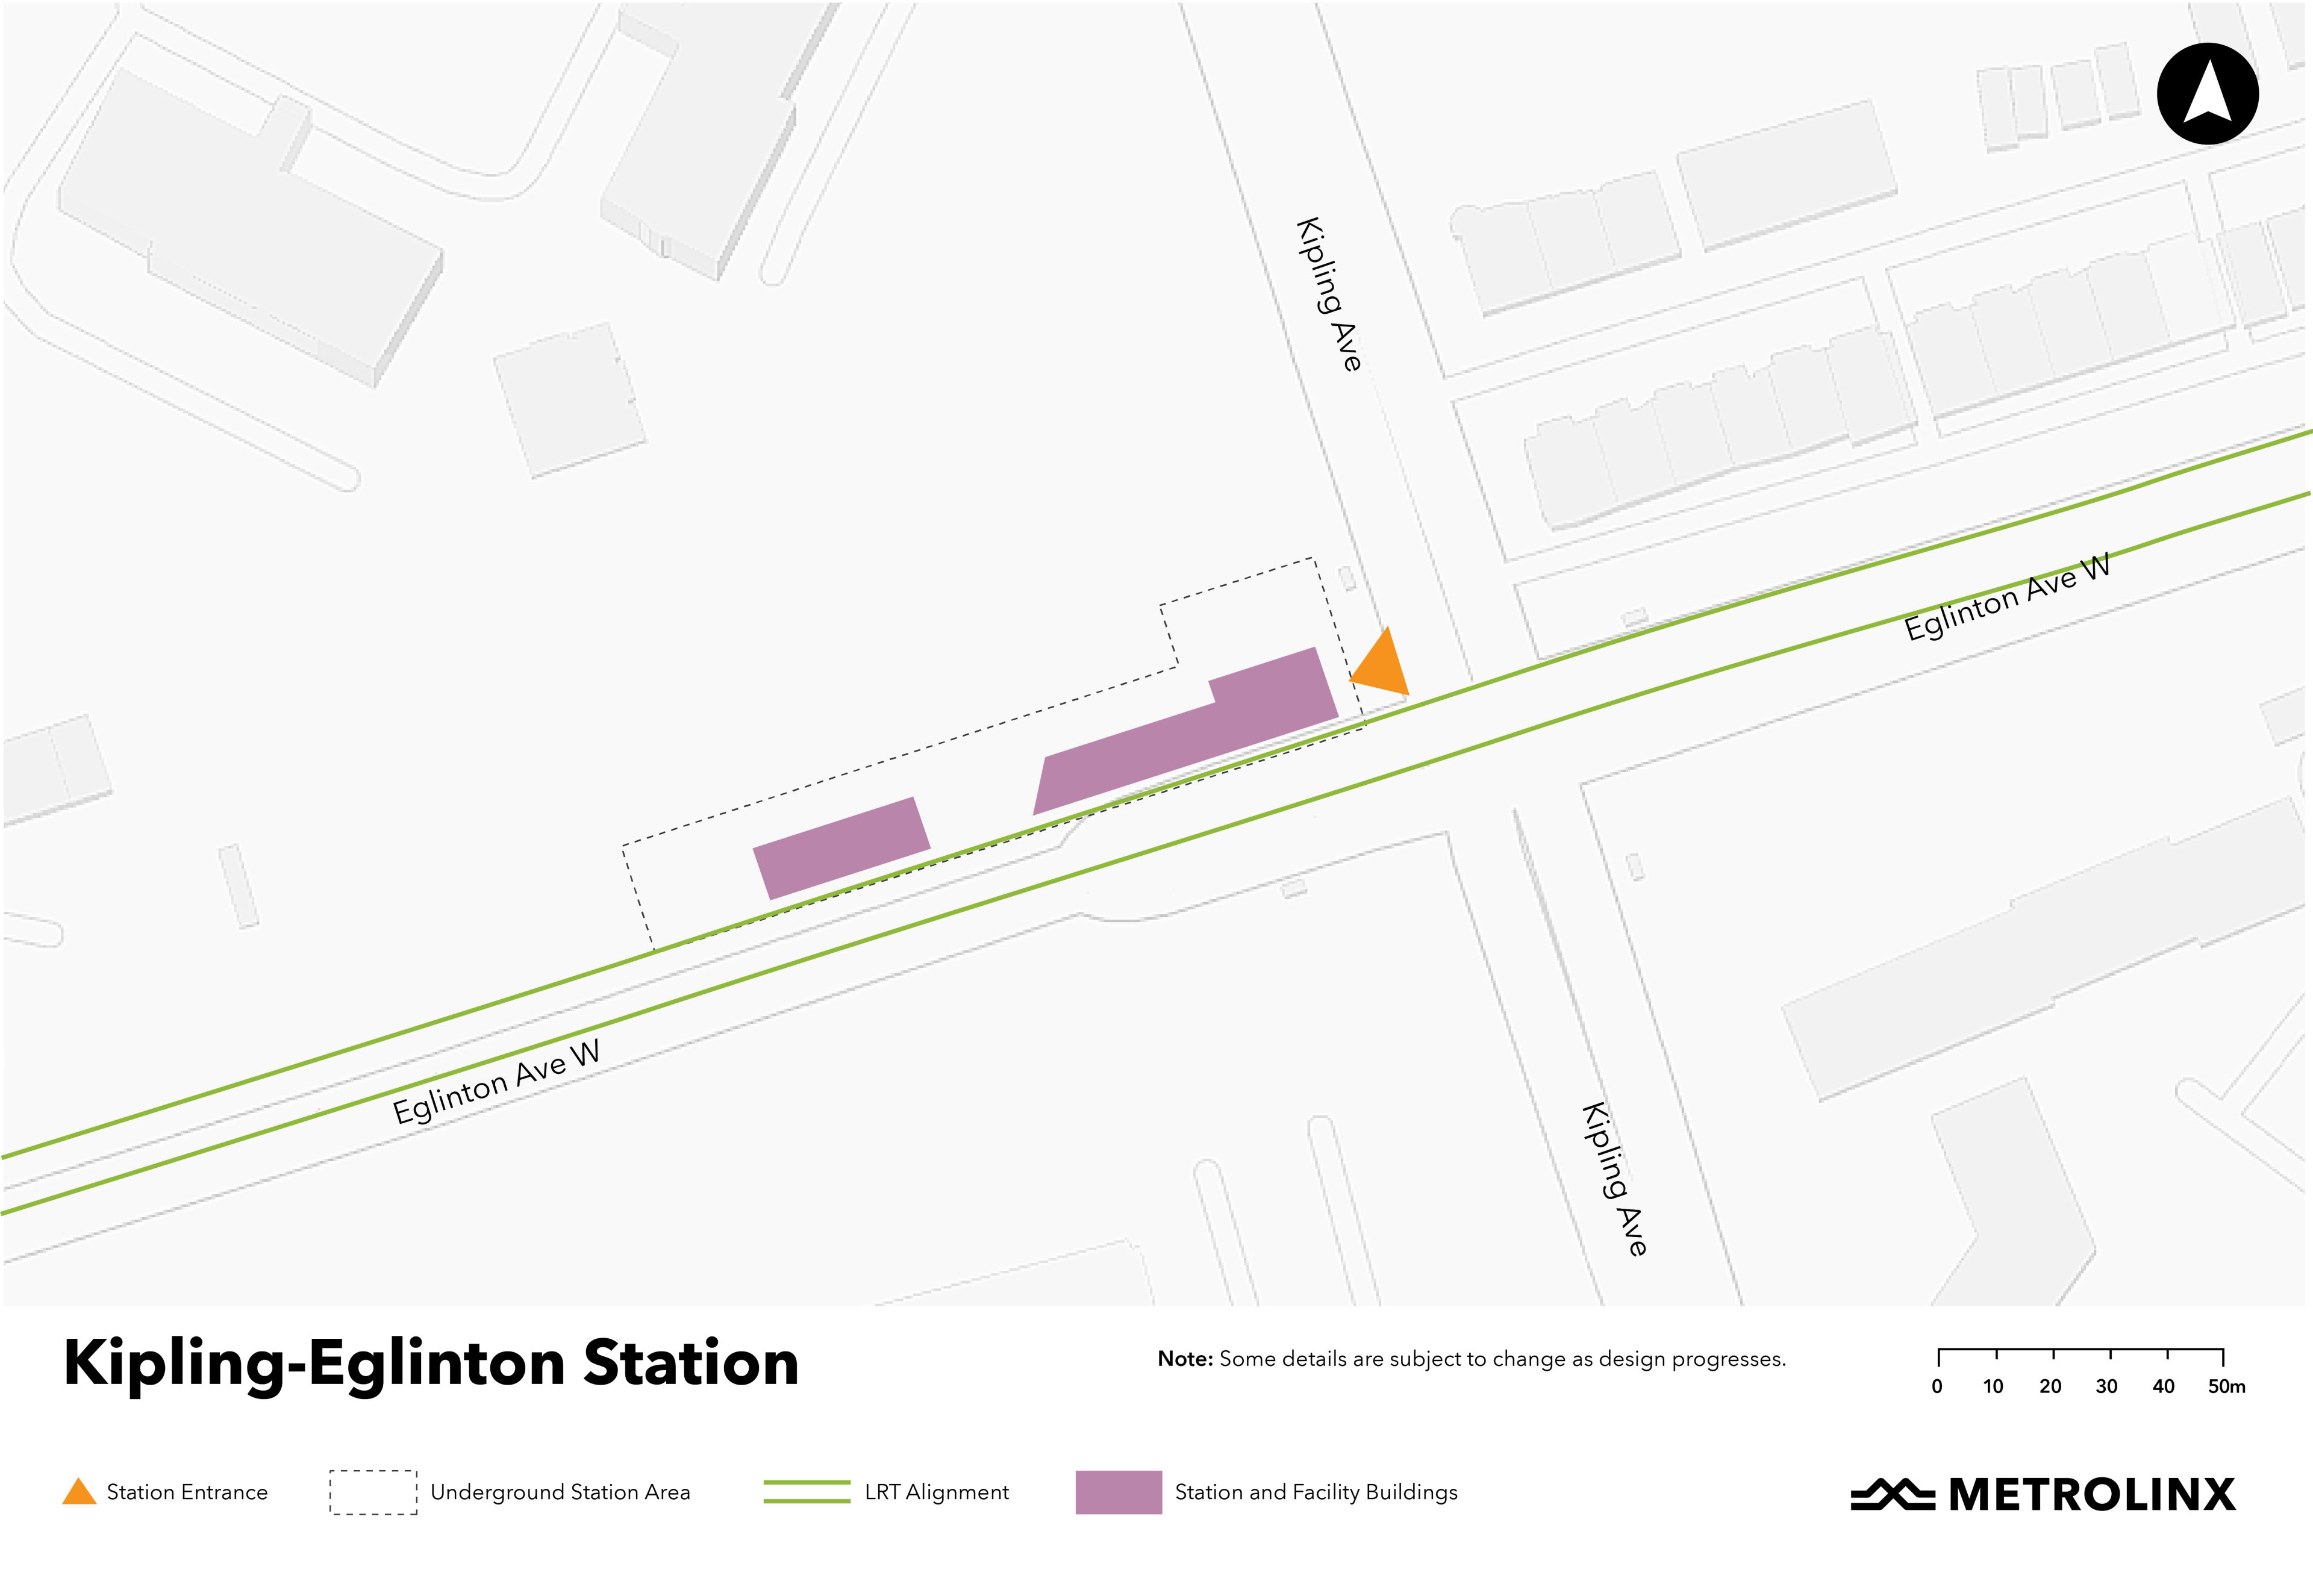 A map of the area around the future Kipling-Eglinton Station